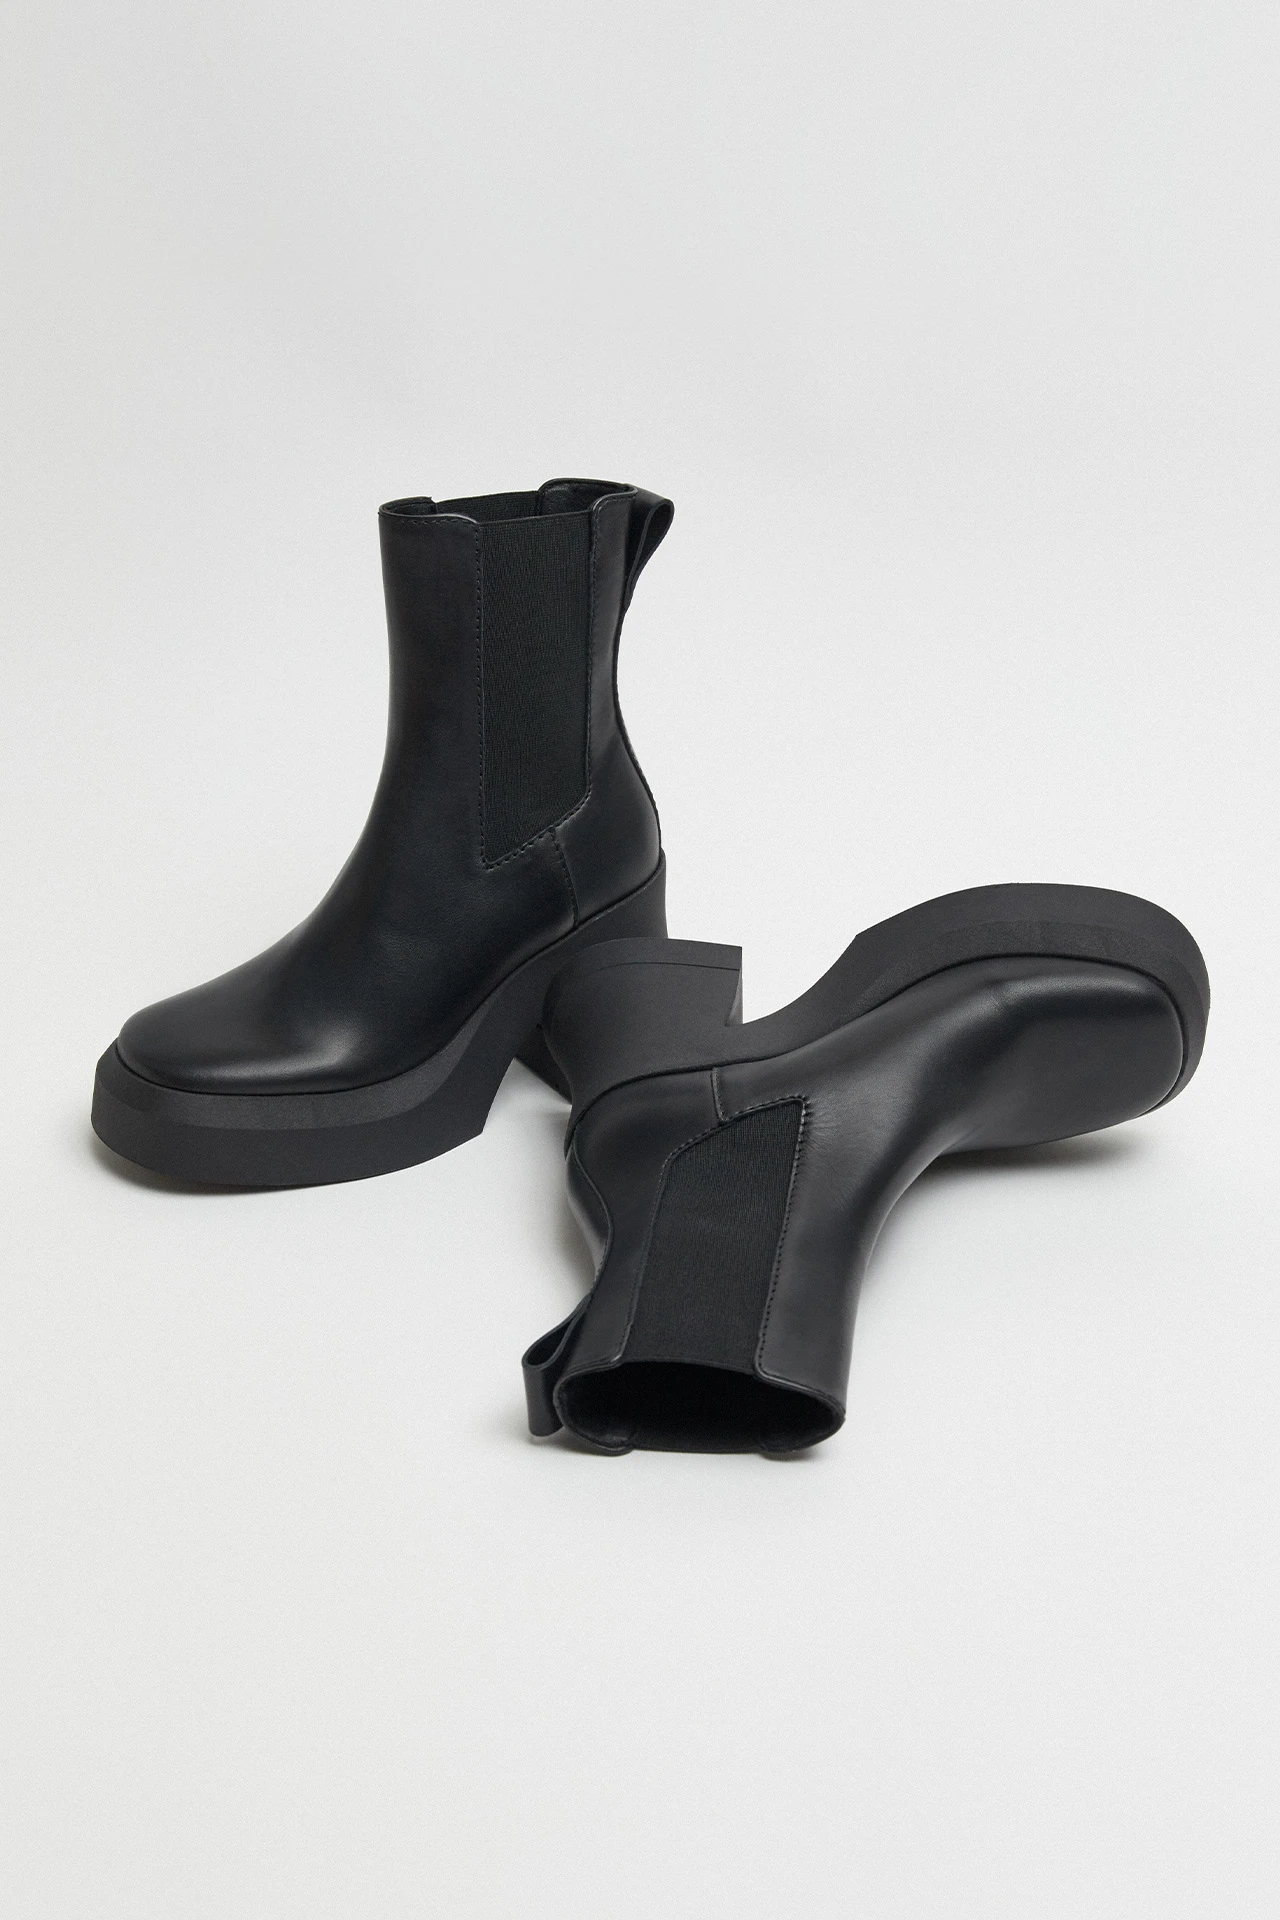 E8-analu-black-ankle-boots-02